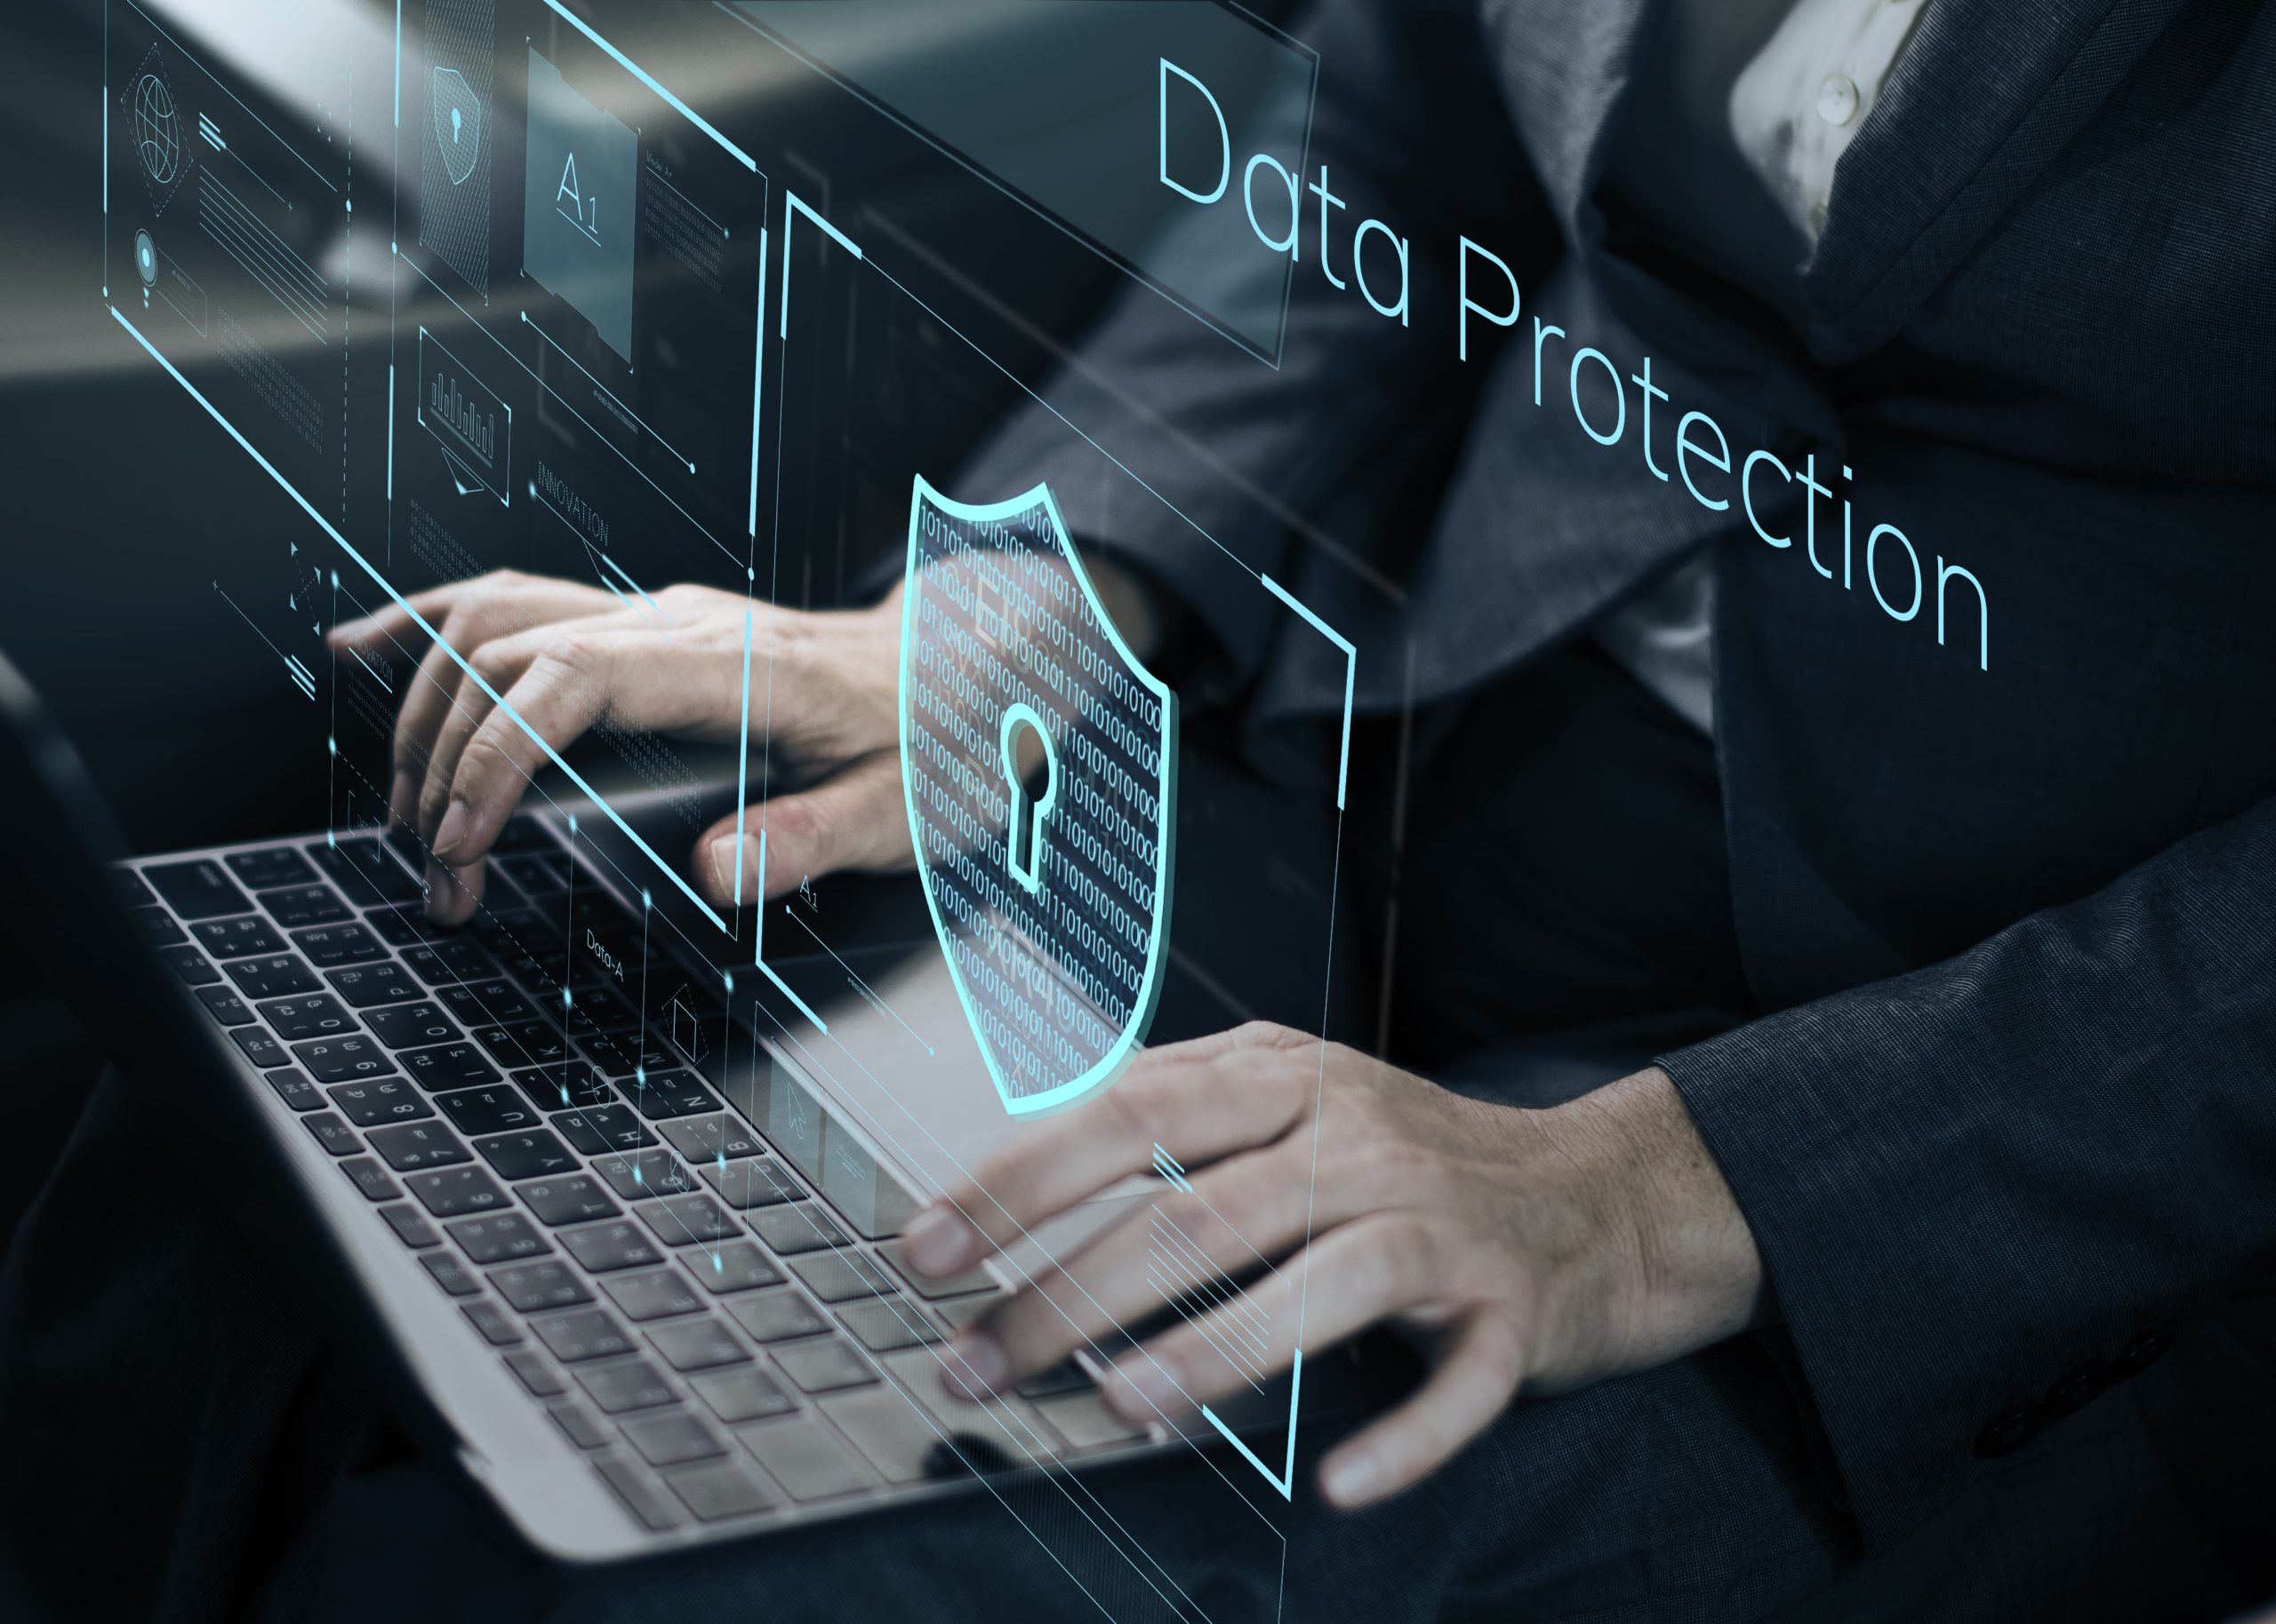 Personal Data Protection: Privacy in the Digital Age